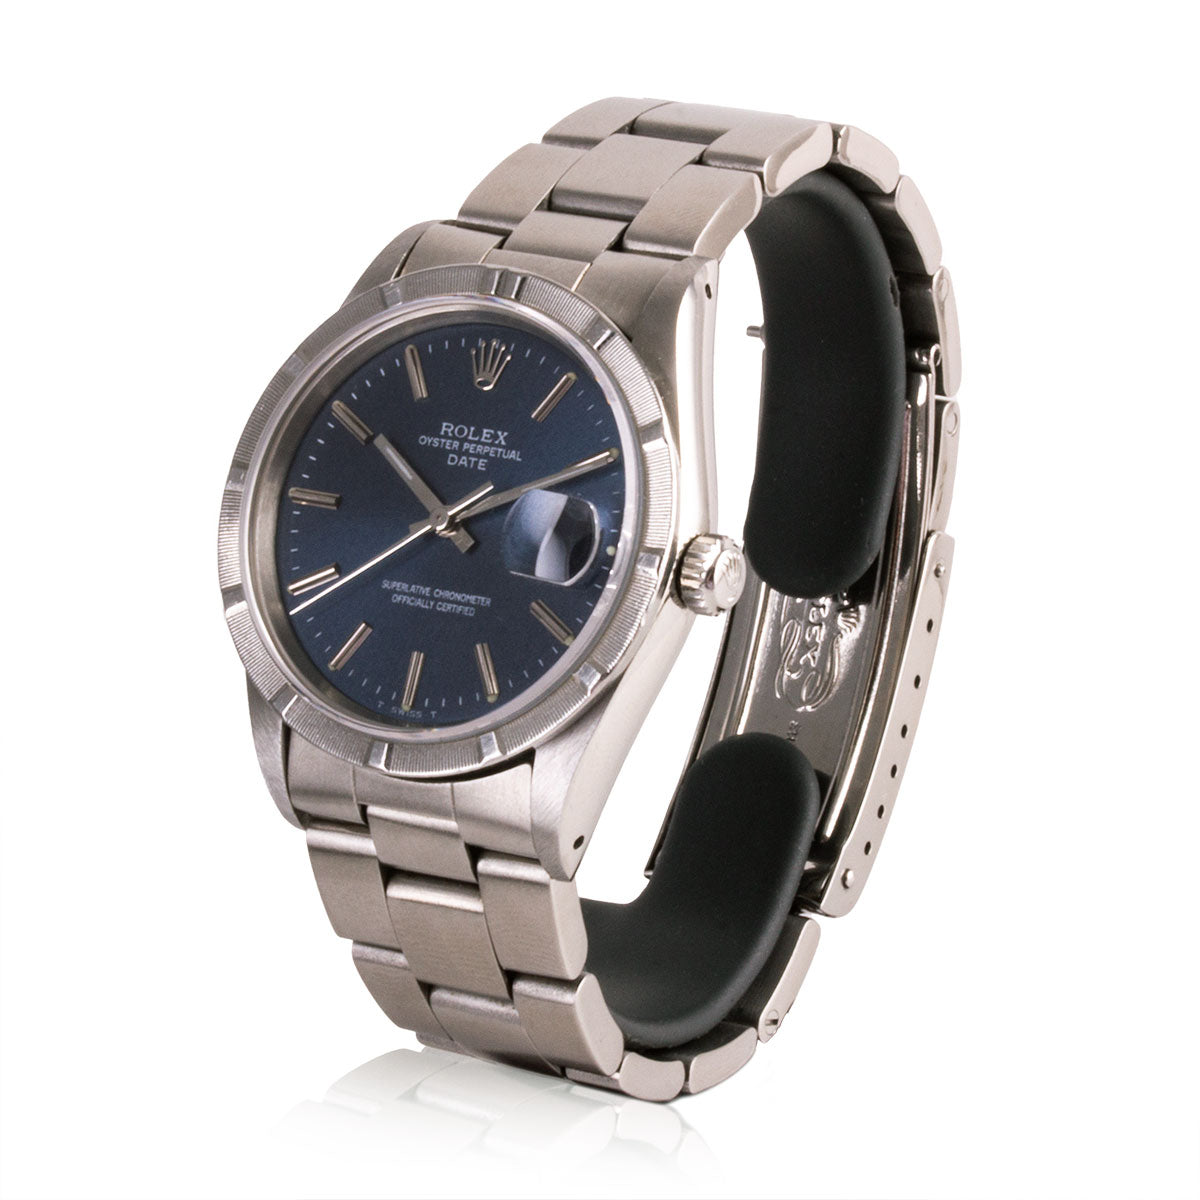 Second-hand watch - Rolex - Oyster Perpetual Date - 5400€